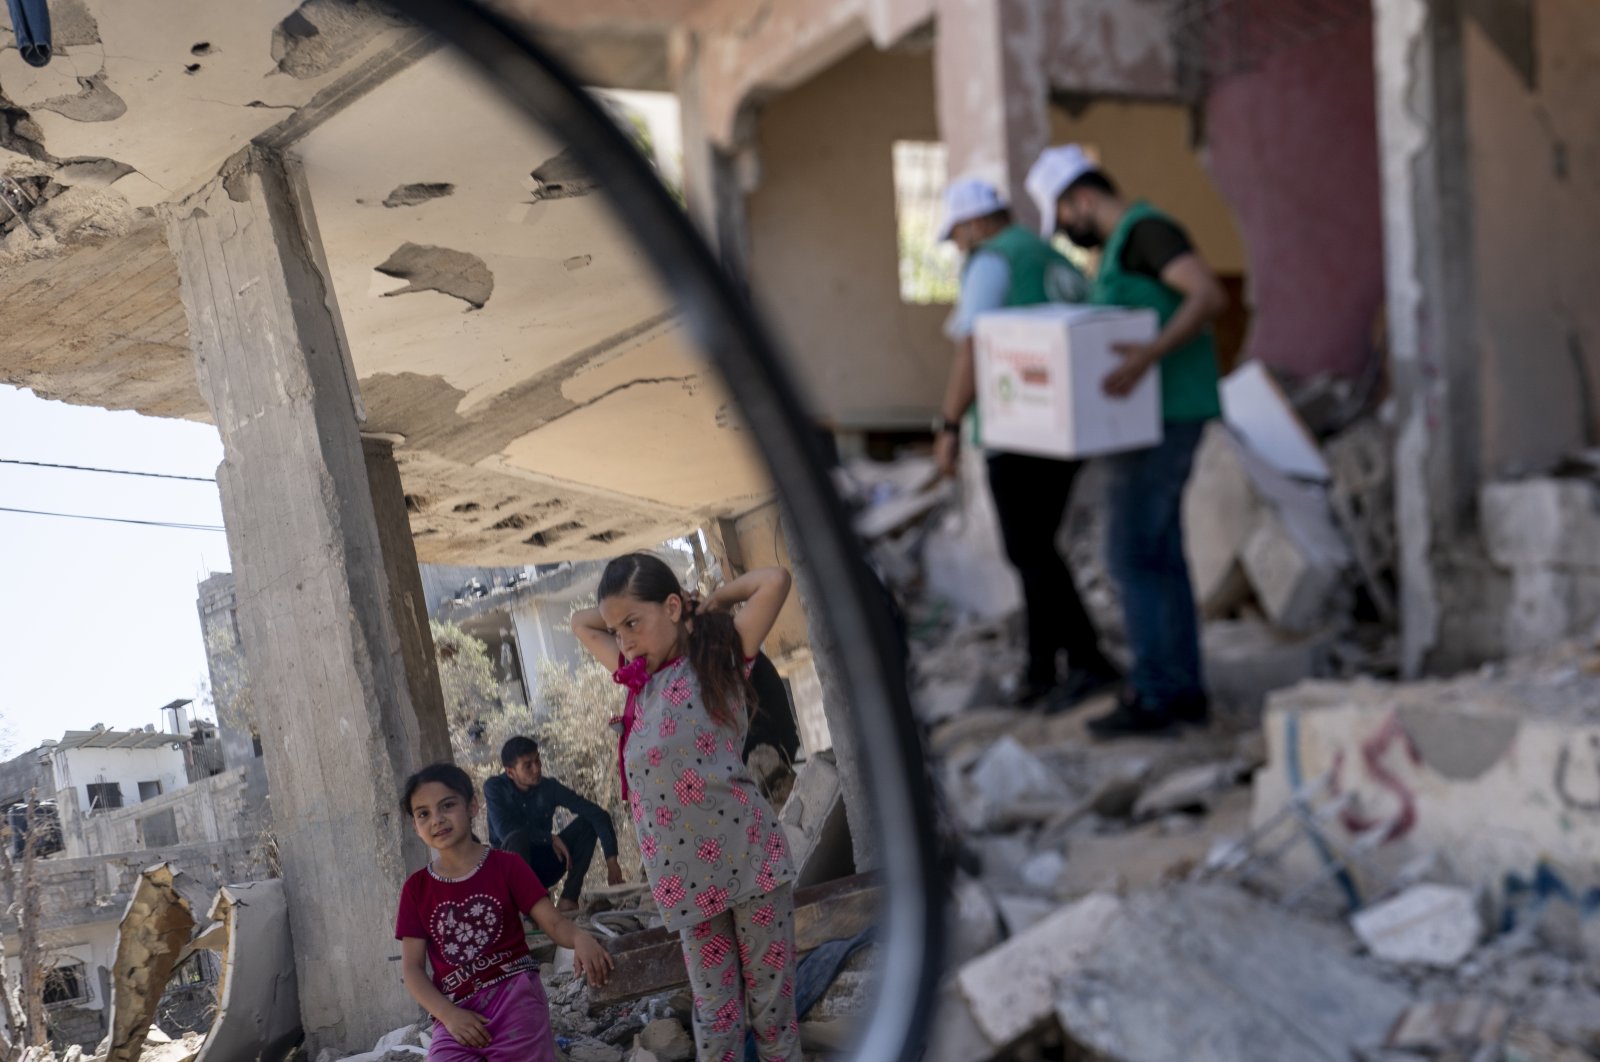 Children stand amid rubble from an Israeli airstrike as aid workers carry boxes through their neighborhood, days after a cease-fire that halted an 11-day war between Gaza's Hamas rulers and Israel, in Beit Hanoun, the Gaza Strip, Palestine, May 26, 2021. (AP Photo)